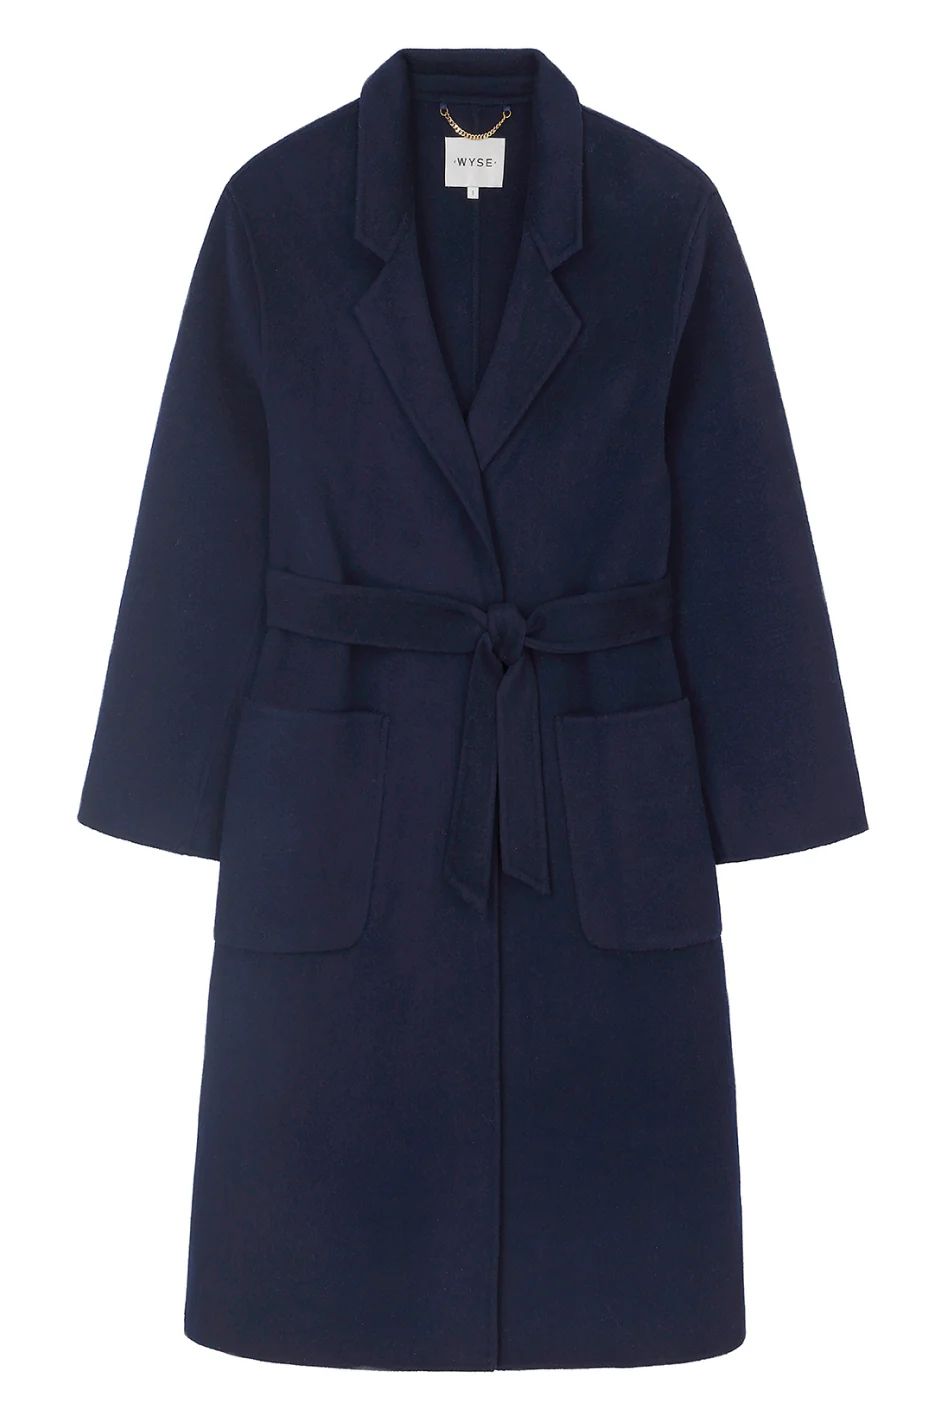 Diane Wool Double Faced Belted Coat - Midnight | WYSE London